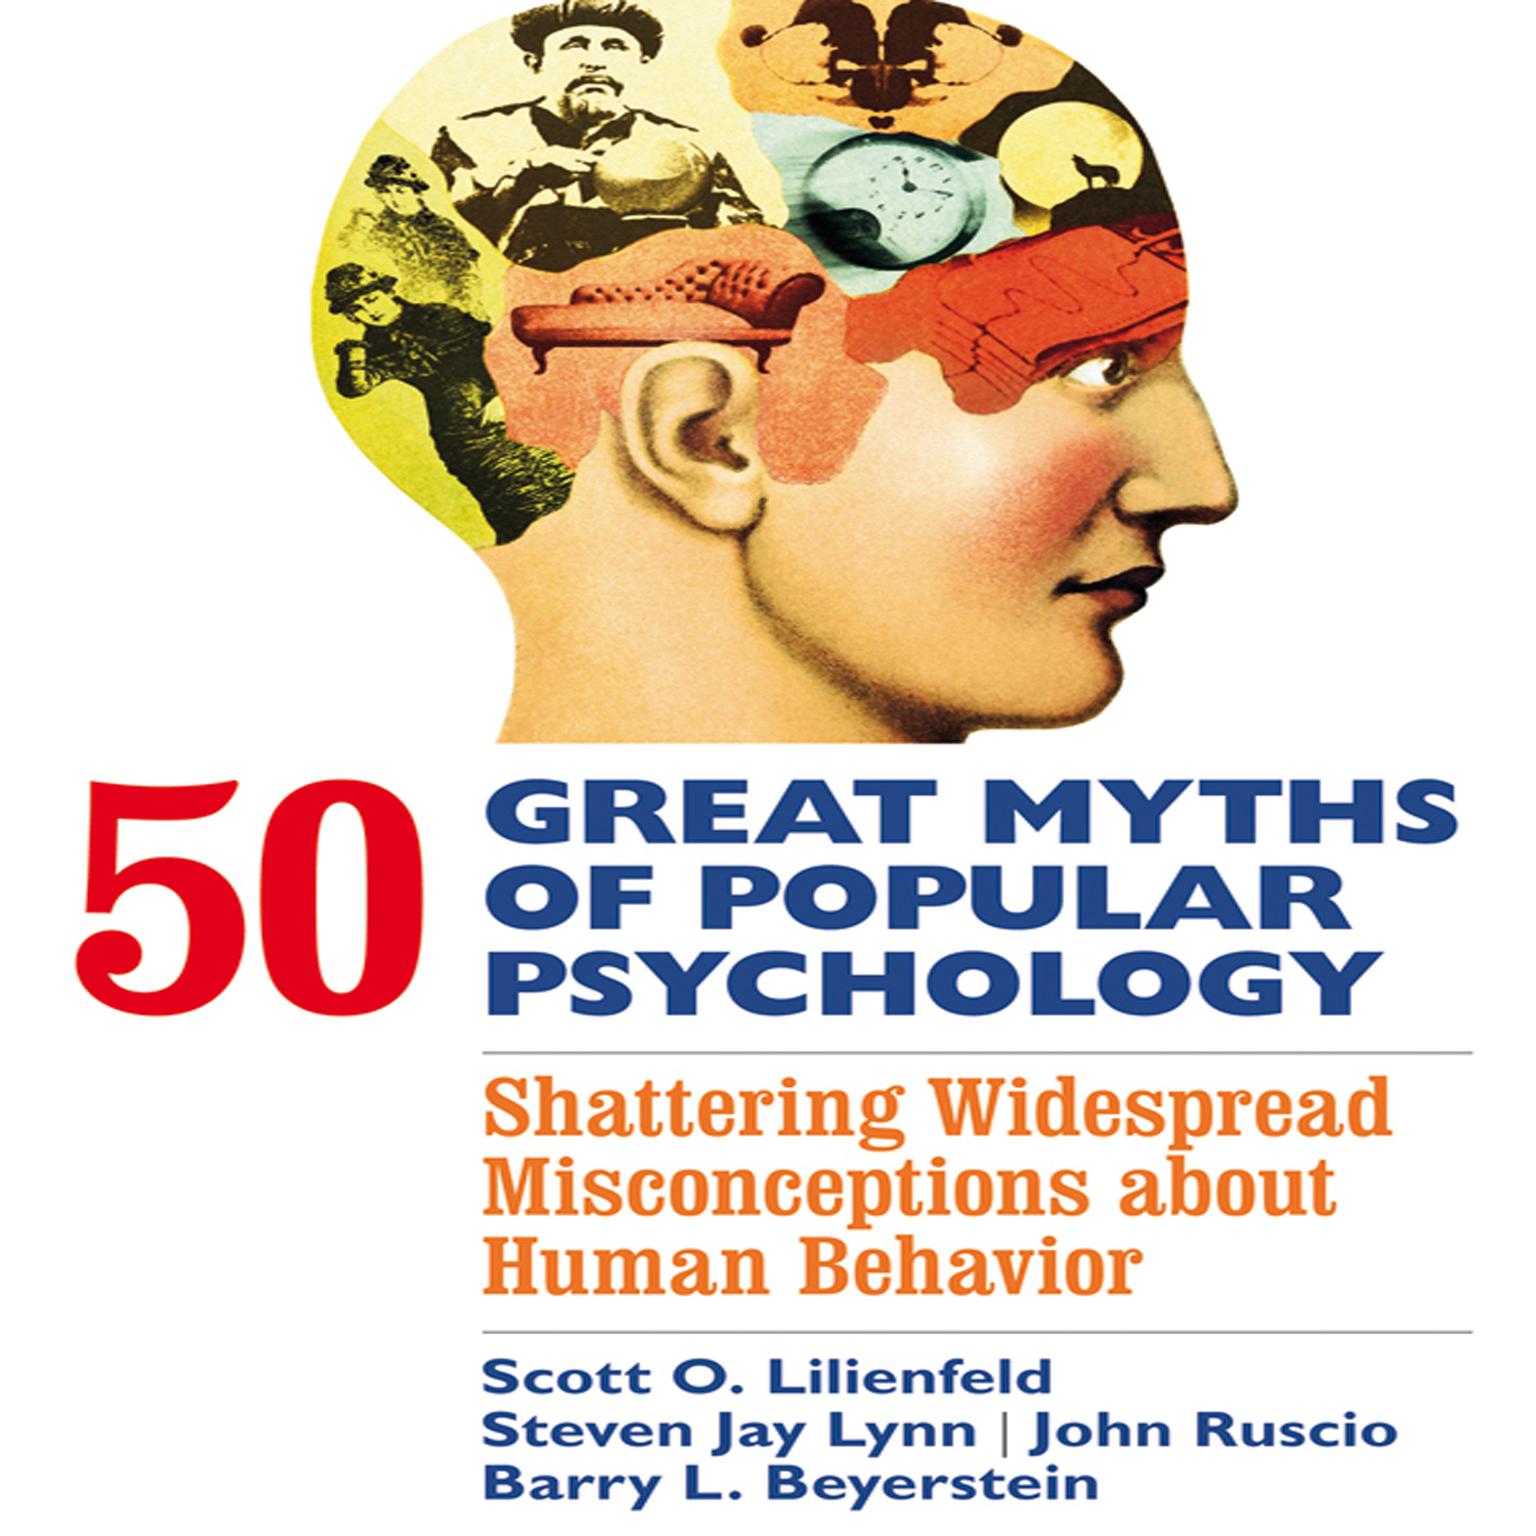 50 Great Myths of Popular Psychology : Shattering Widespread Misconceptions about Human Behavior Audiobook, by Scott O. Lilienfeld